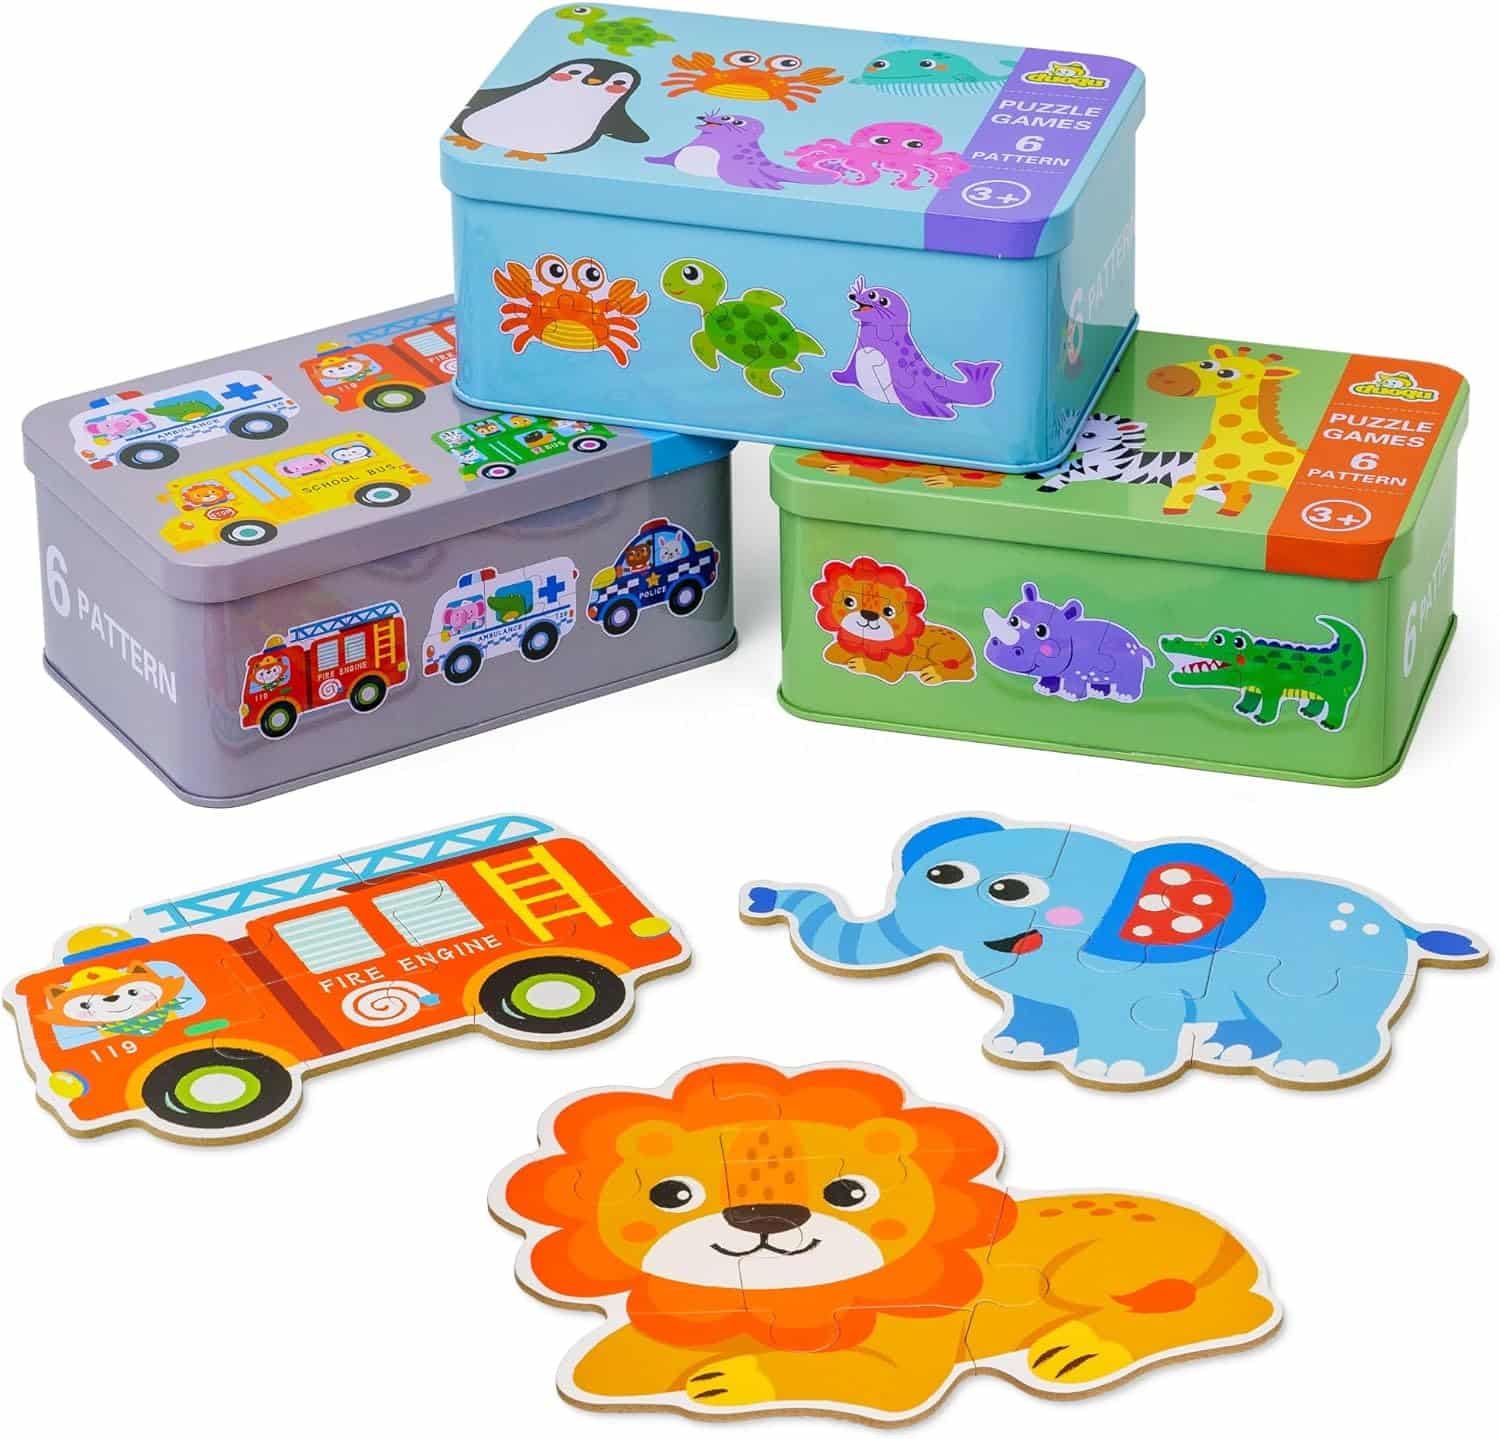 PLAYHIVE Montessori Wooden Puzzles for Kids Ages 3-5 - 3 Pack with 18 Shapes - Educational Toddler Toy Bundle - Gift for 3 Year Old Boys Girls - Wild Animals, Marine Animals & Cars Theme